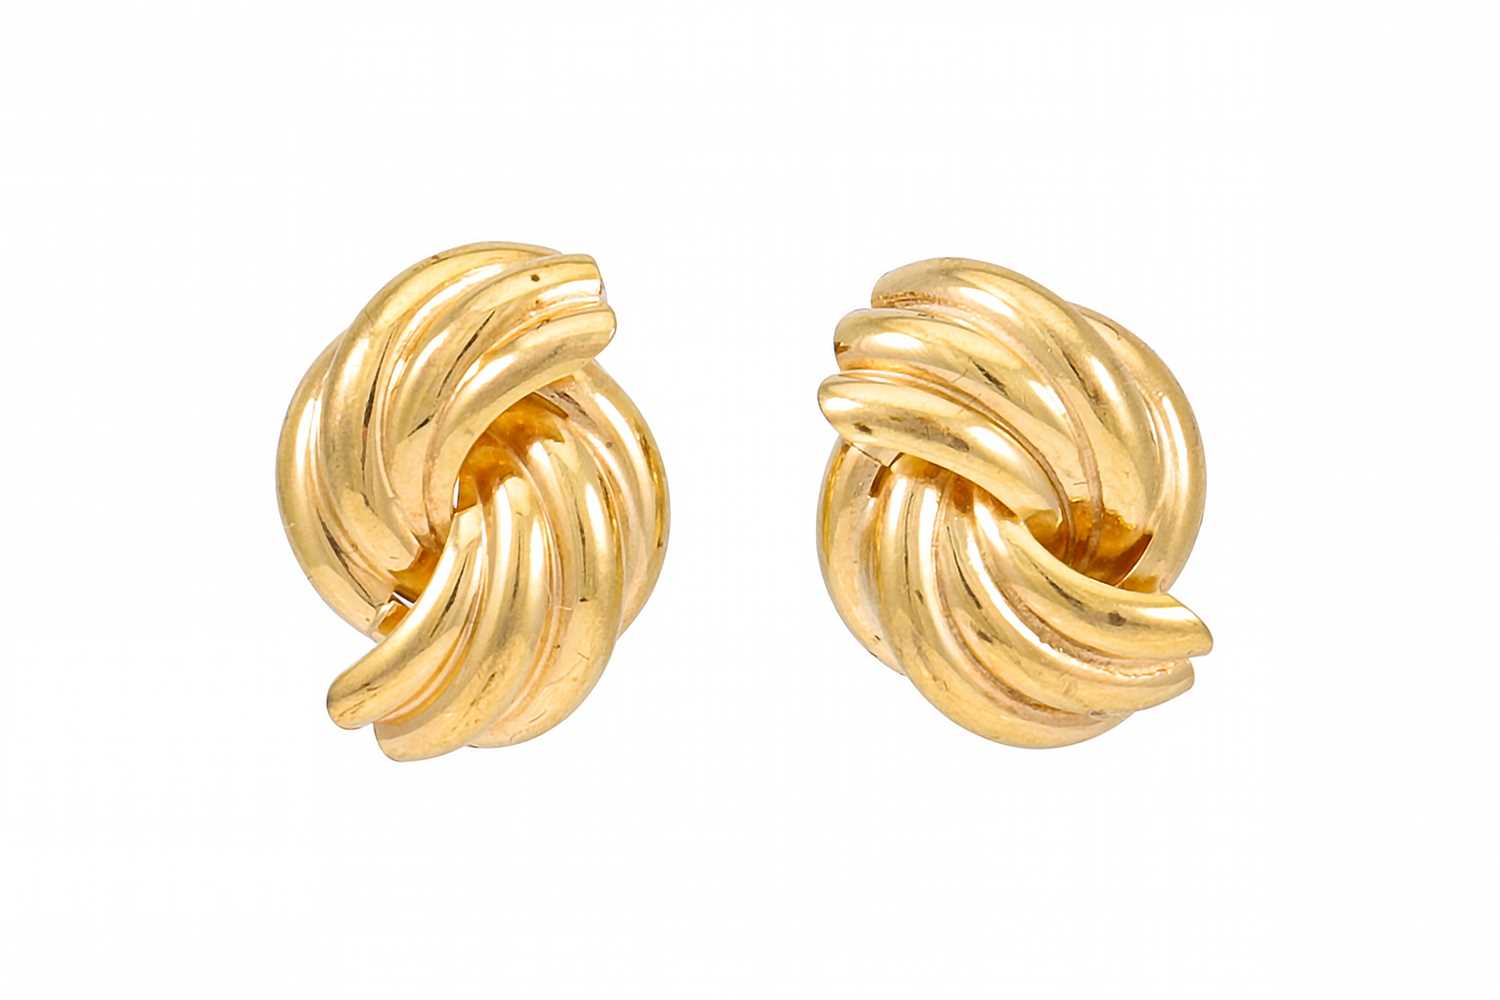 Lot 190 - A PAIR OF GOLD EARRINGS, in the form of knots